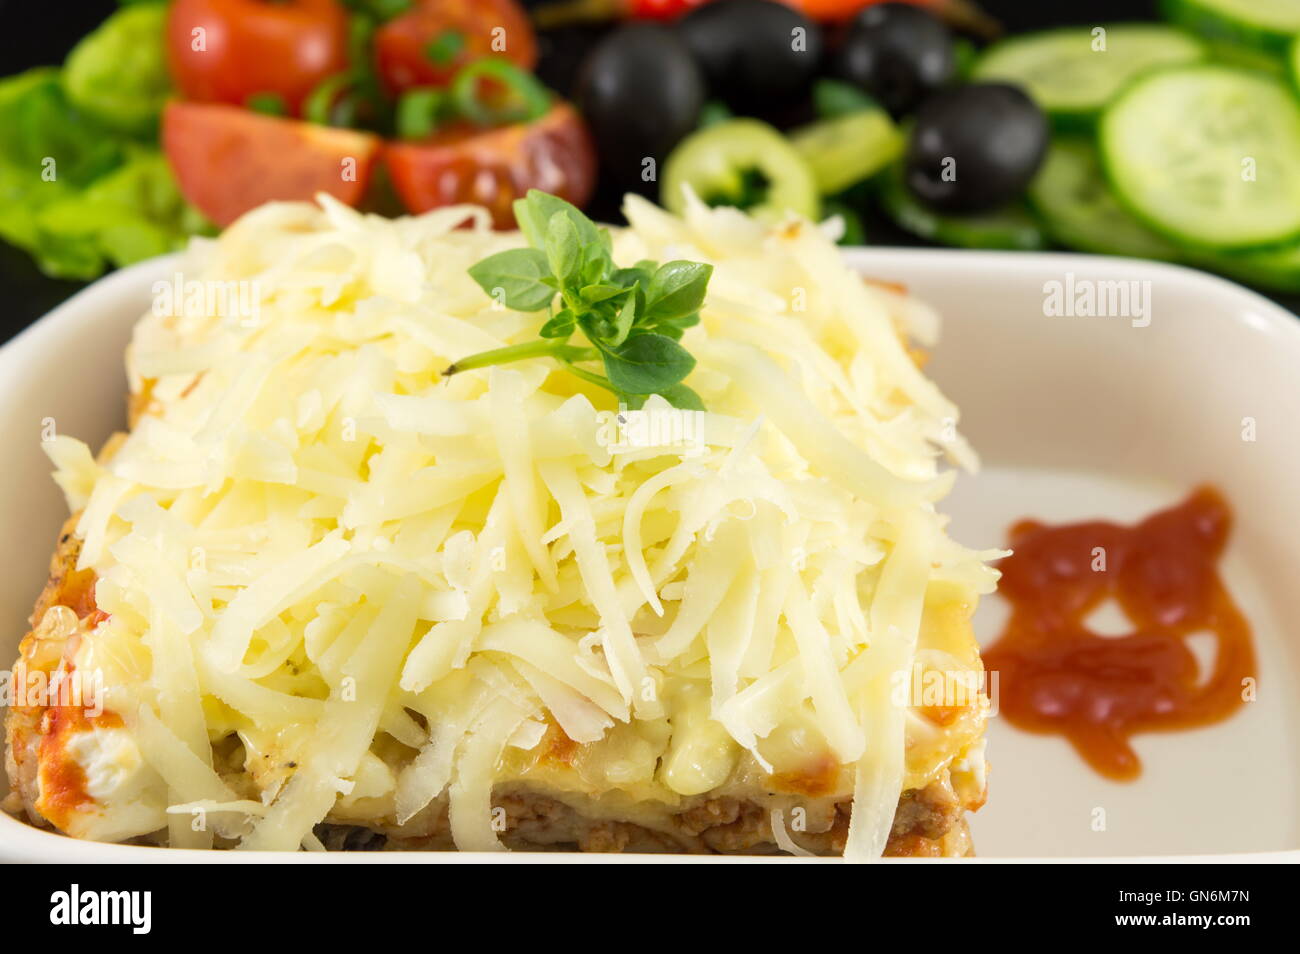 Lasagna portion served with fresh vegetables close up Stock Photo